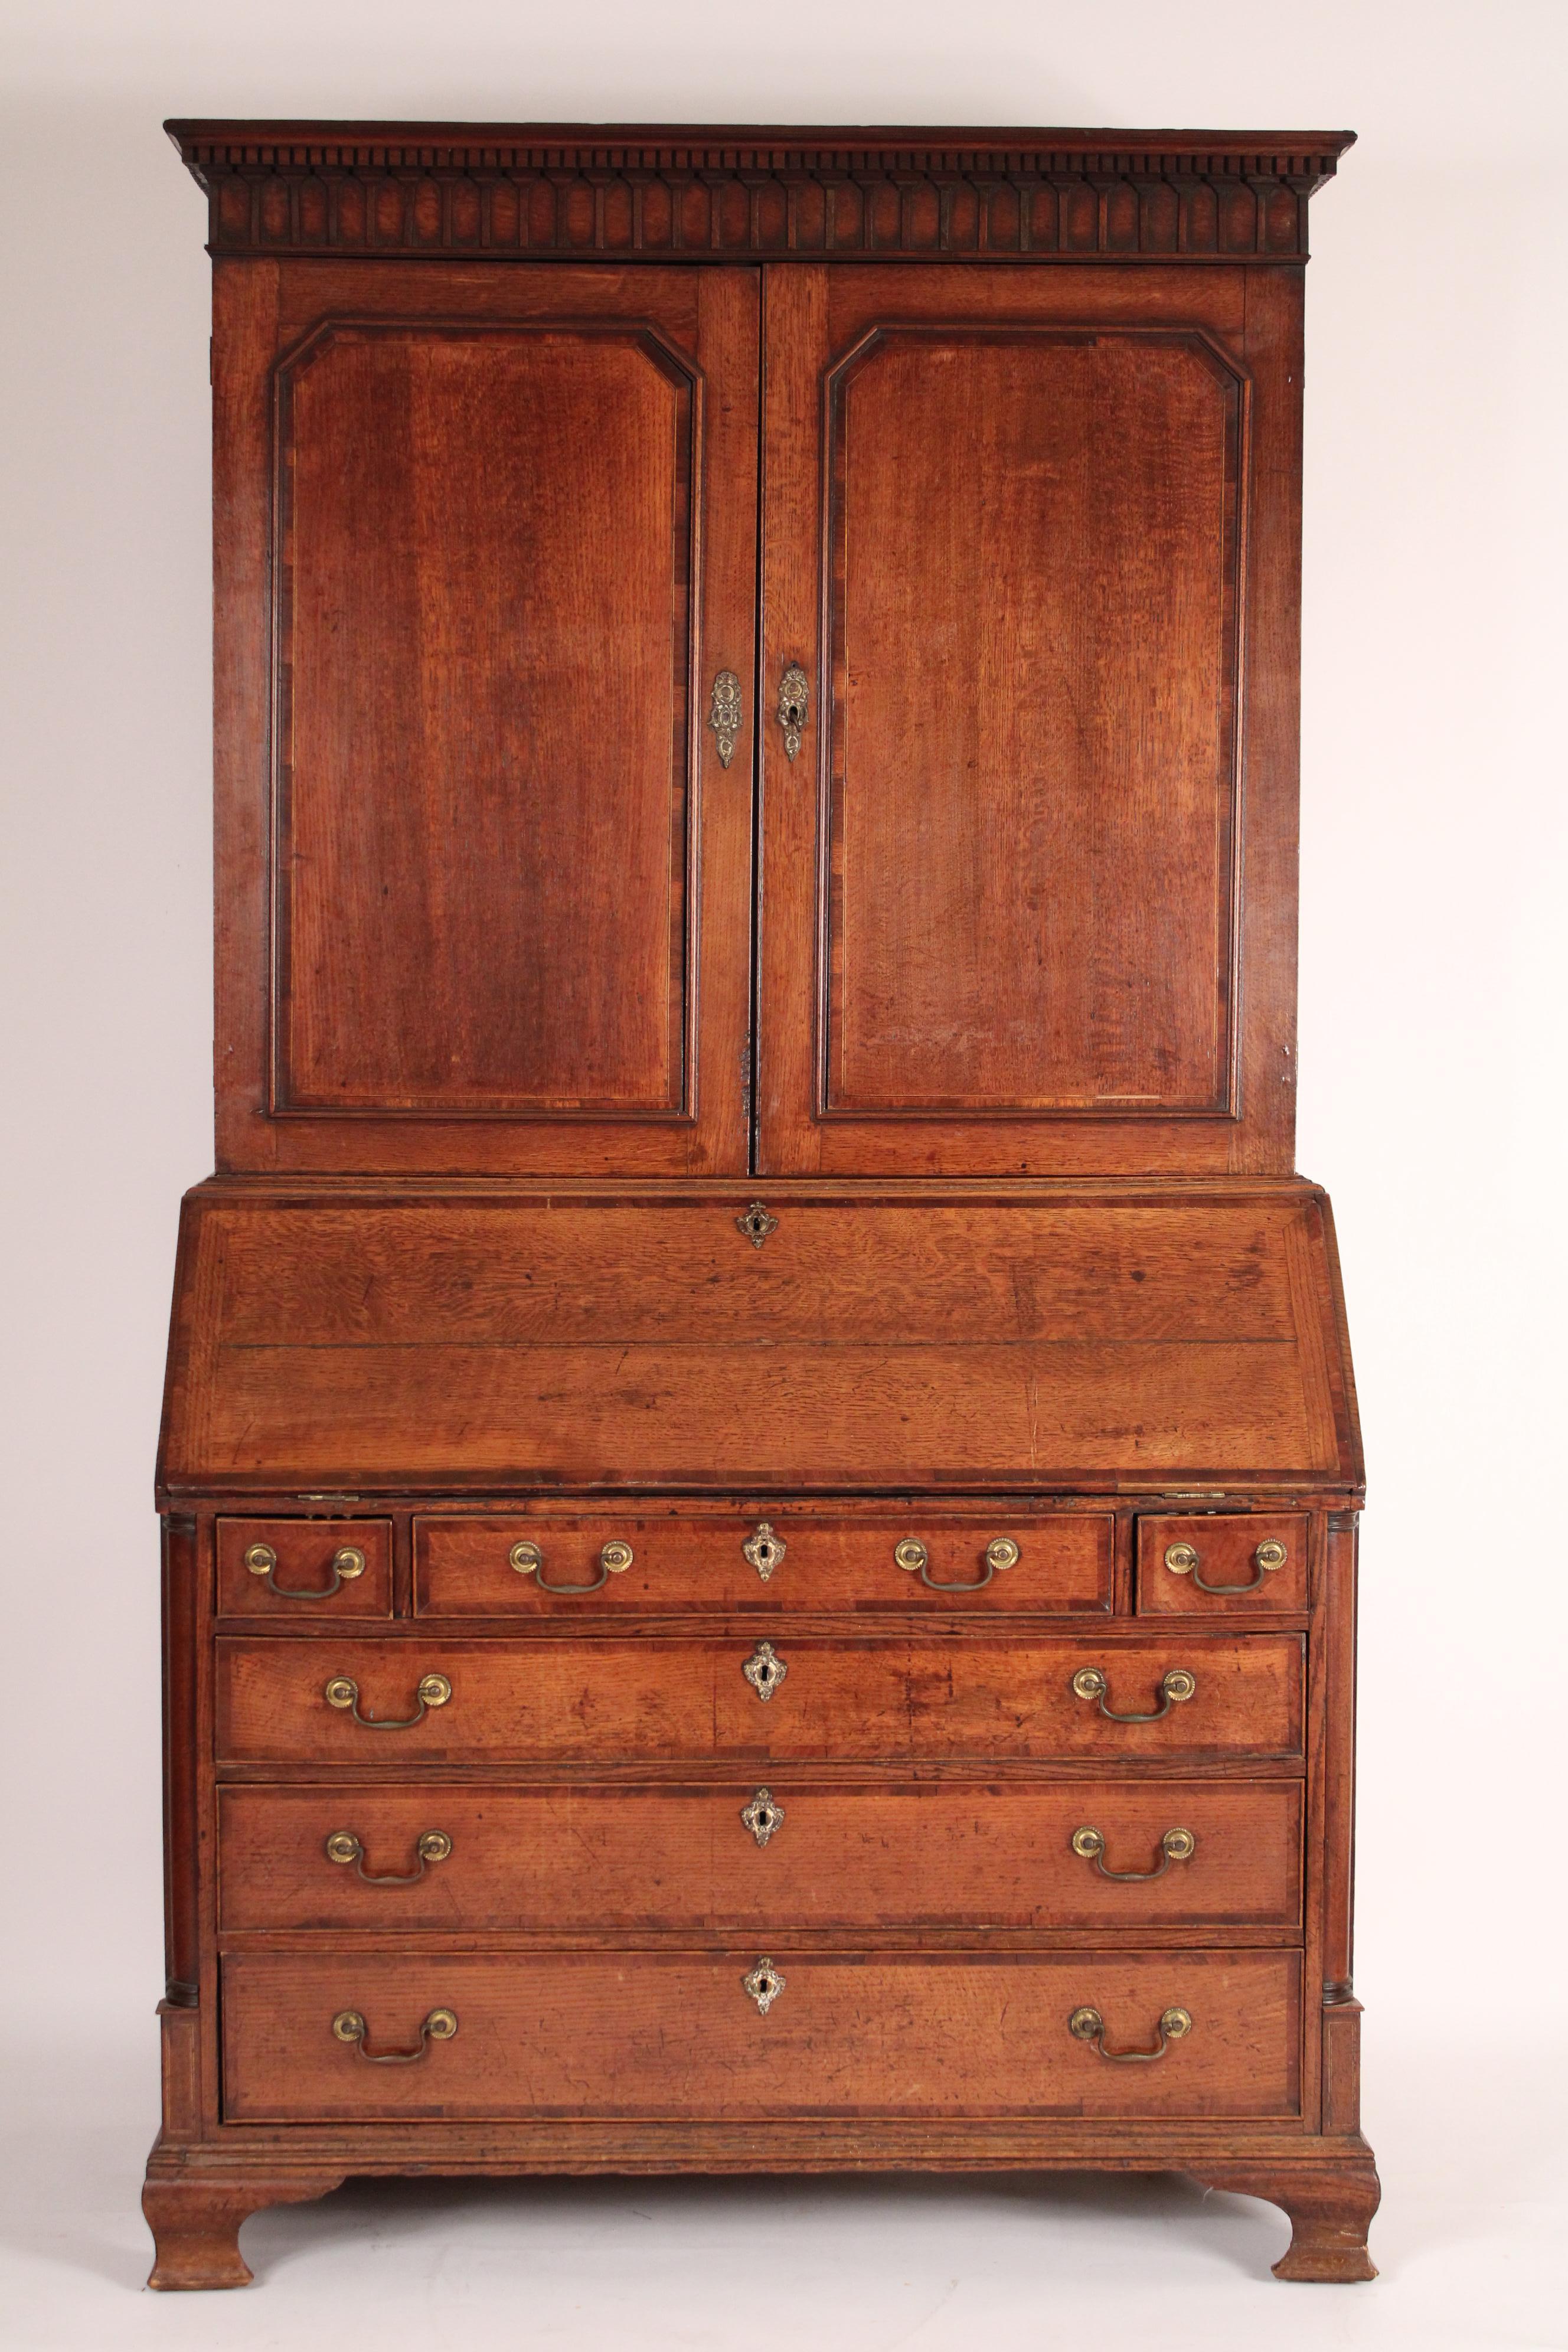 George III quarter sawn oak secretary, circa 1810. With a concave cornice, dental molding, two quarter sawn oak doors with mahogany crossbanding, a quarter sawn oak slant top with mahogany crossbanding, the interior with a central prospect door with